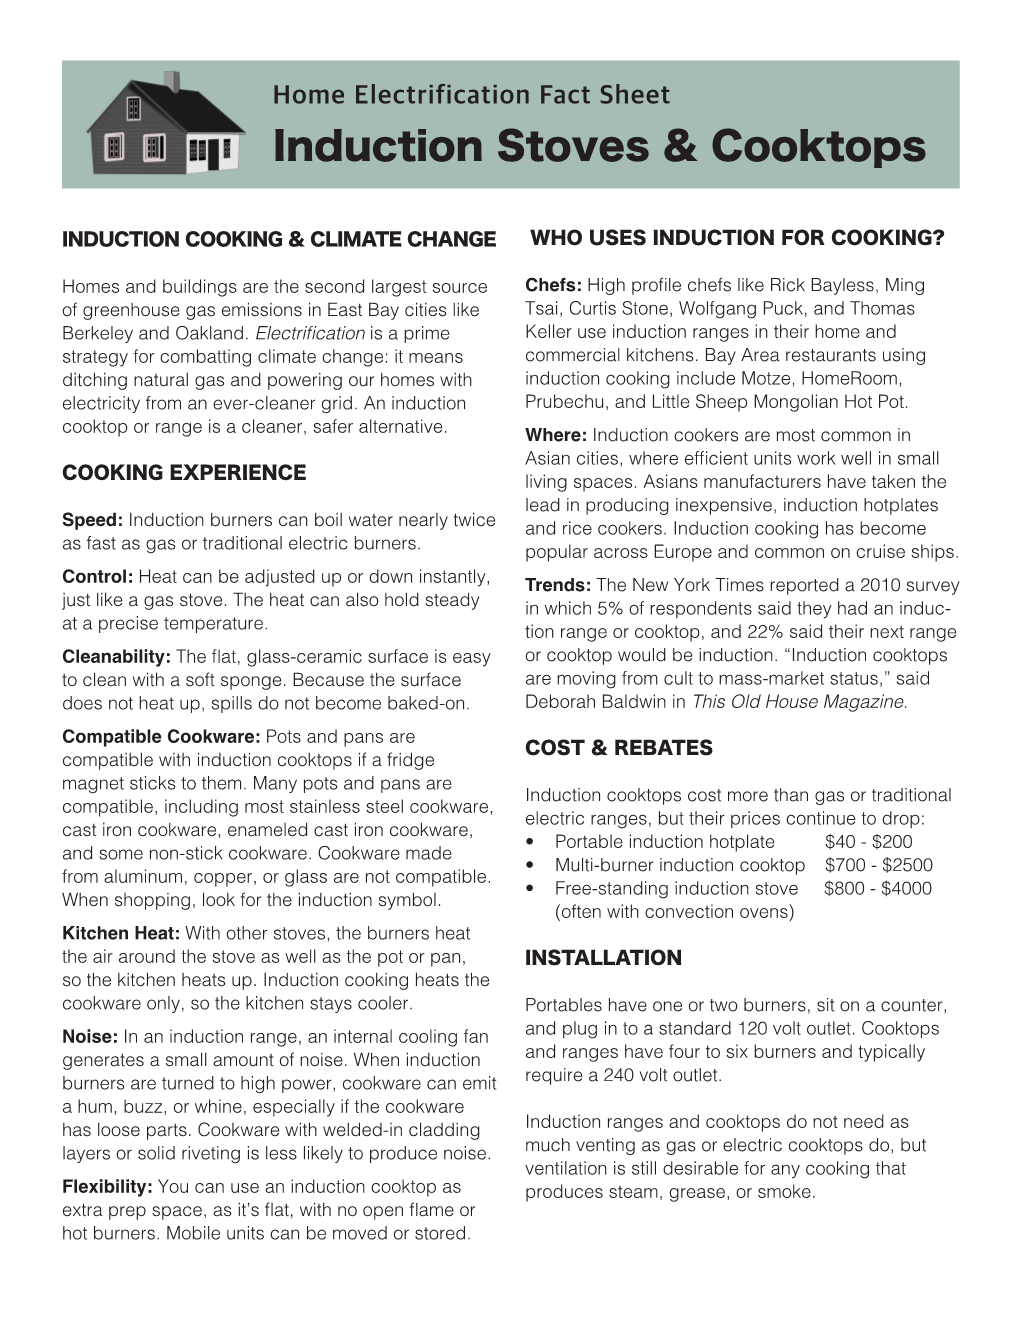 Home Electrification Fact Sheet Induction Stoves & Cooktops